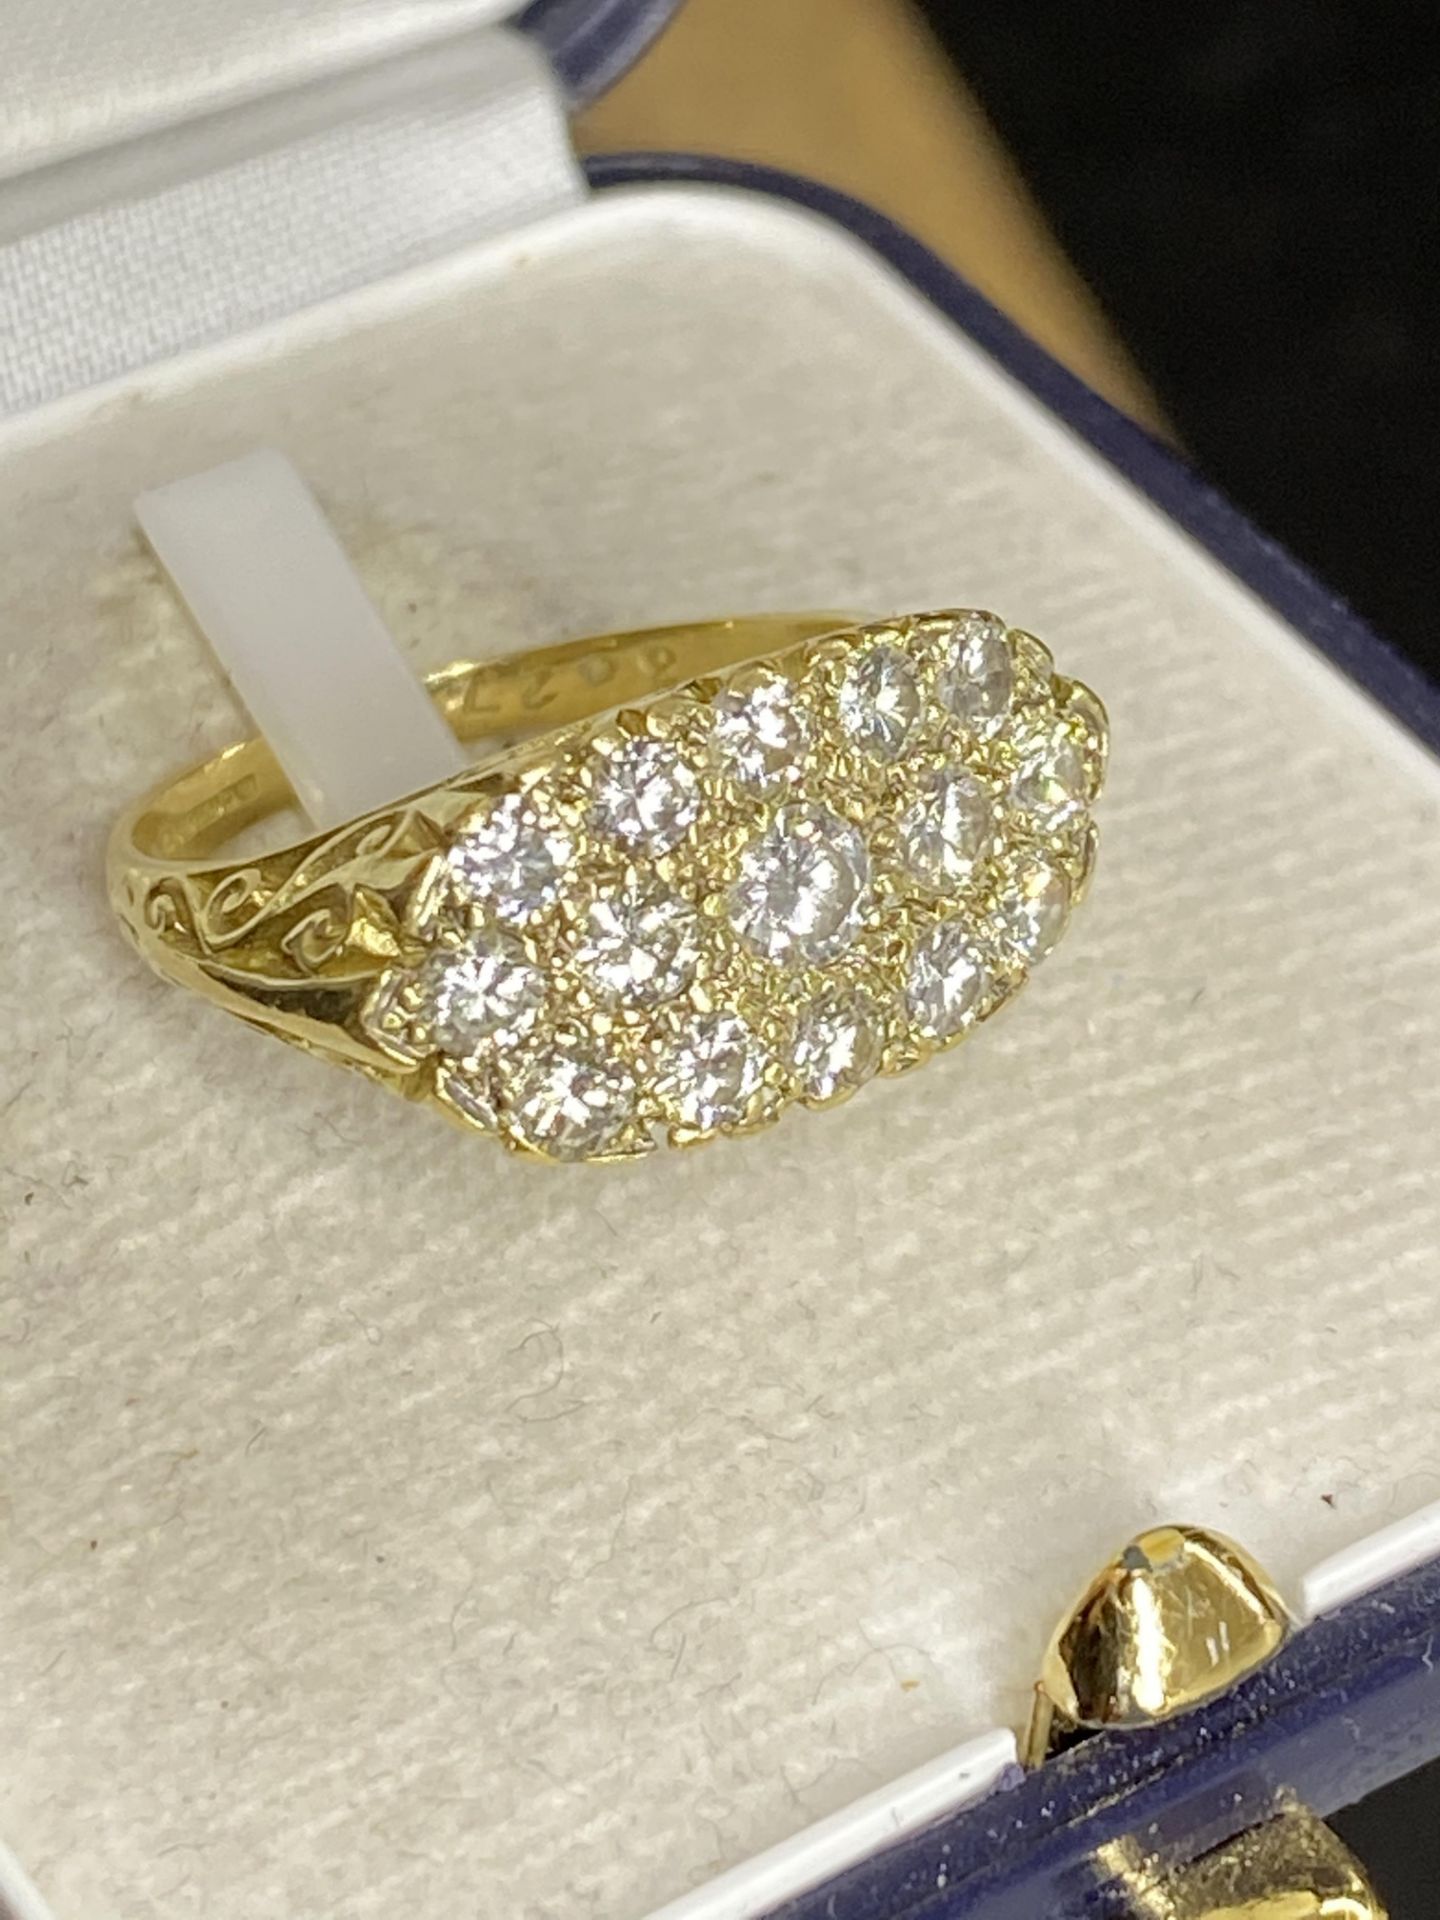 18ct YELLOW GOLD 3.27ct DIAMOND RING WITH 11K INSURANCE VALUATION - Image 4 of 10